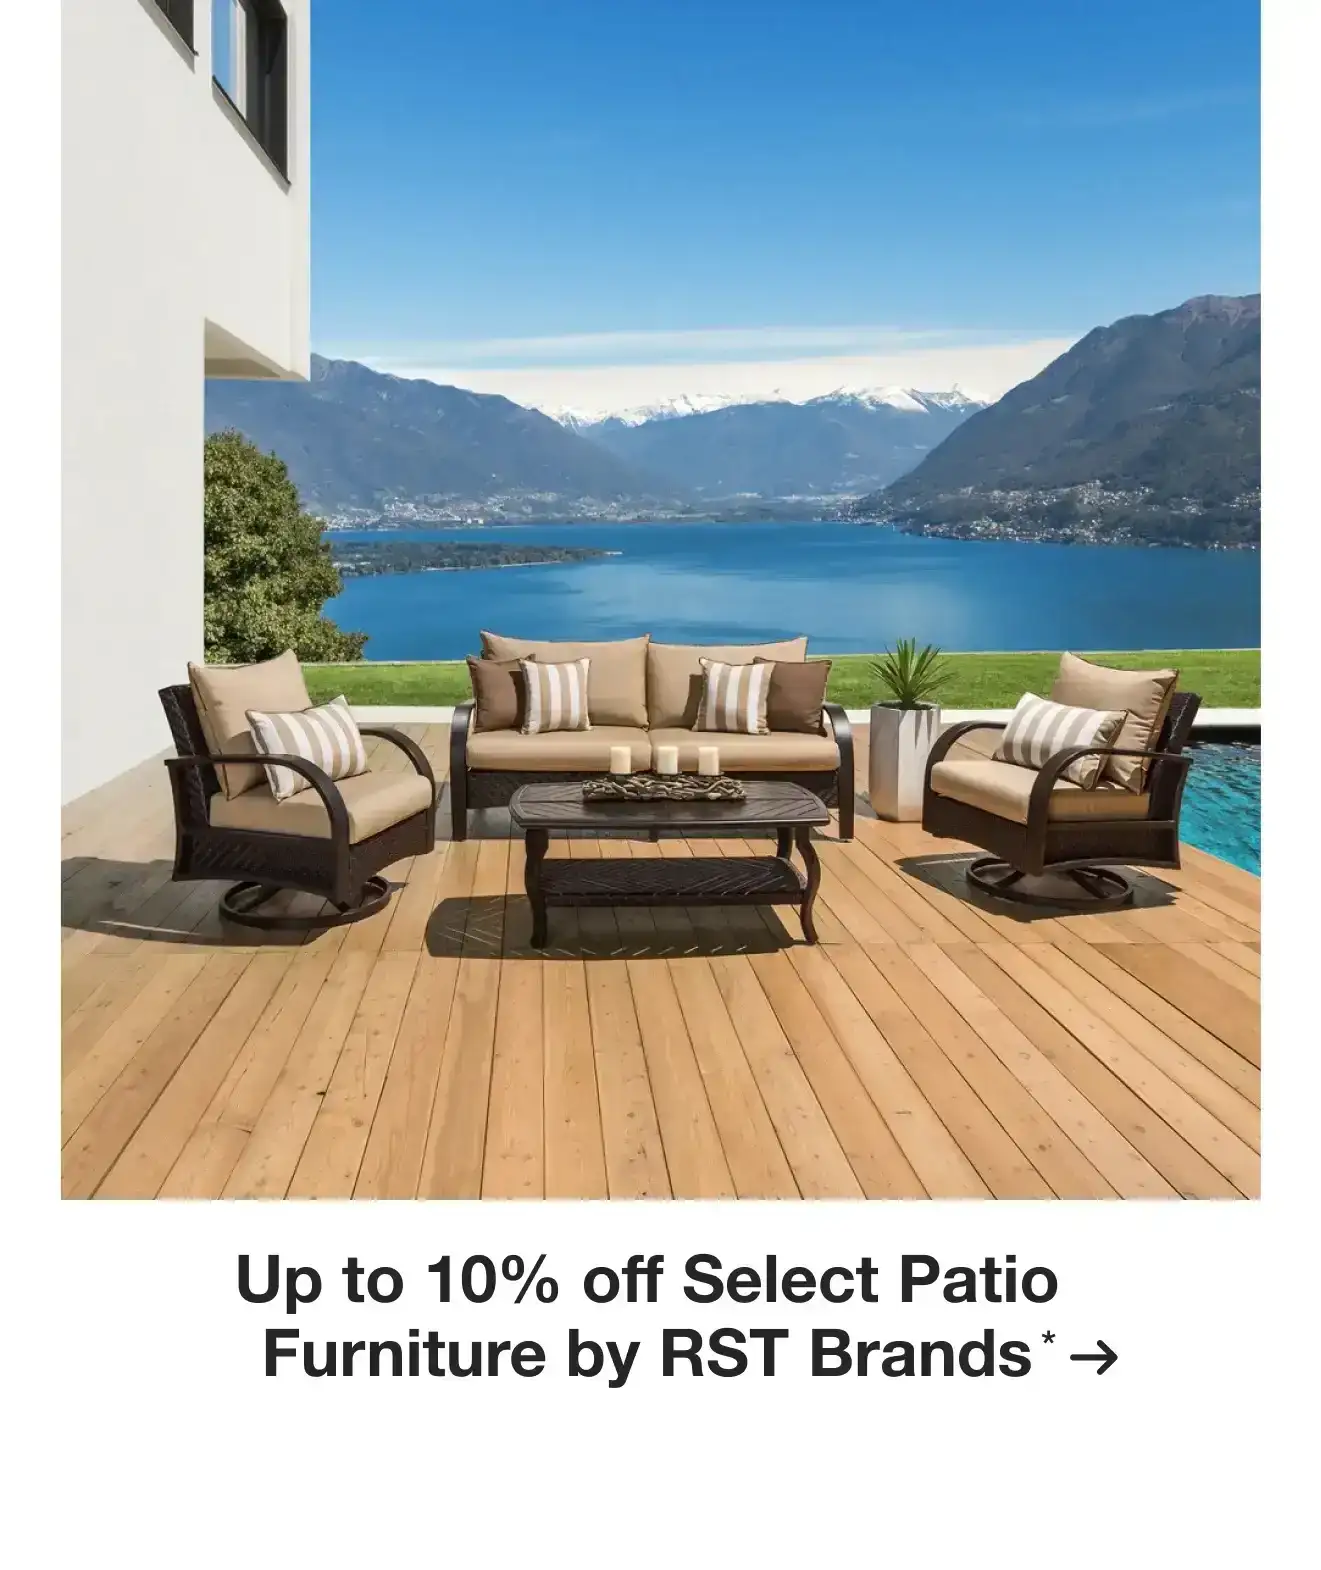 Up to 10% off Select Patio Furniture by RST Brands*